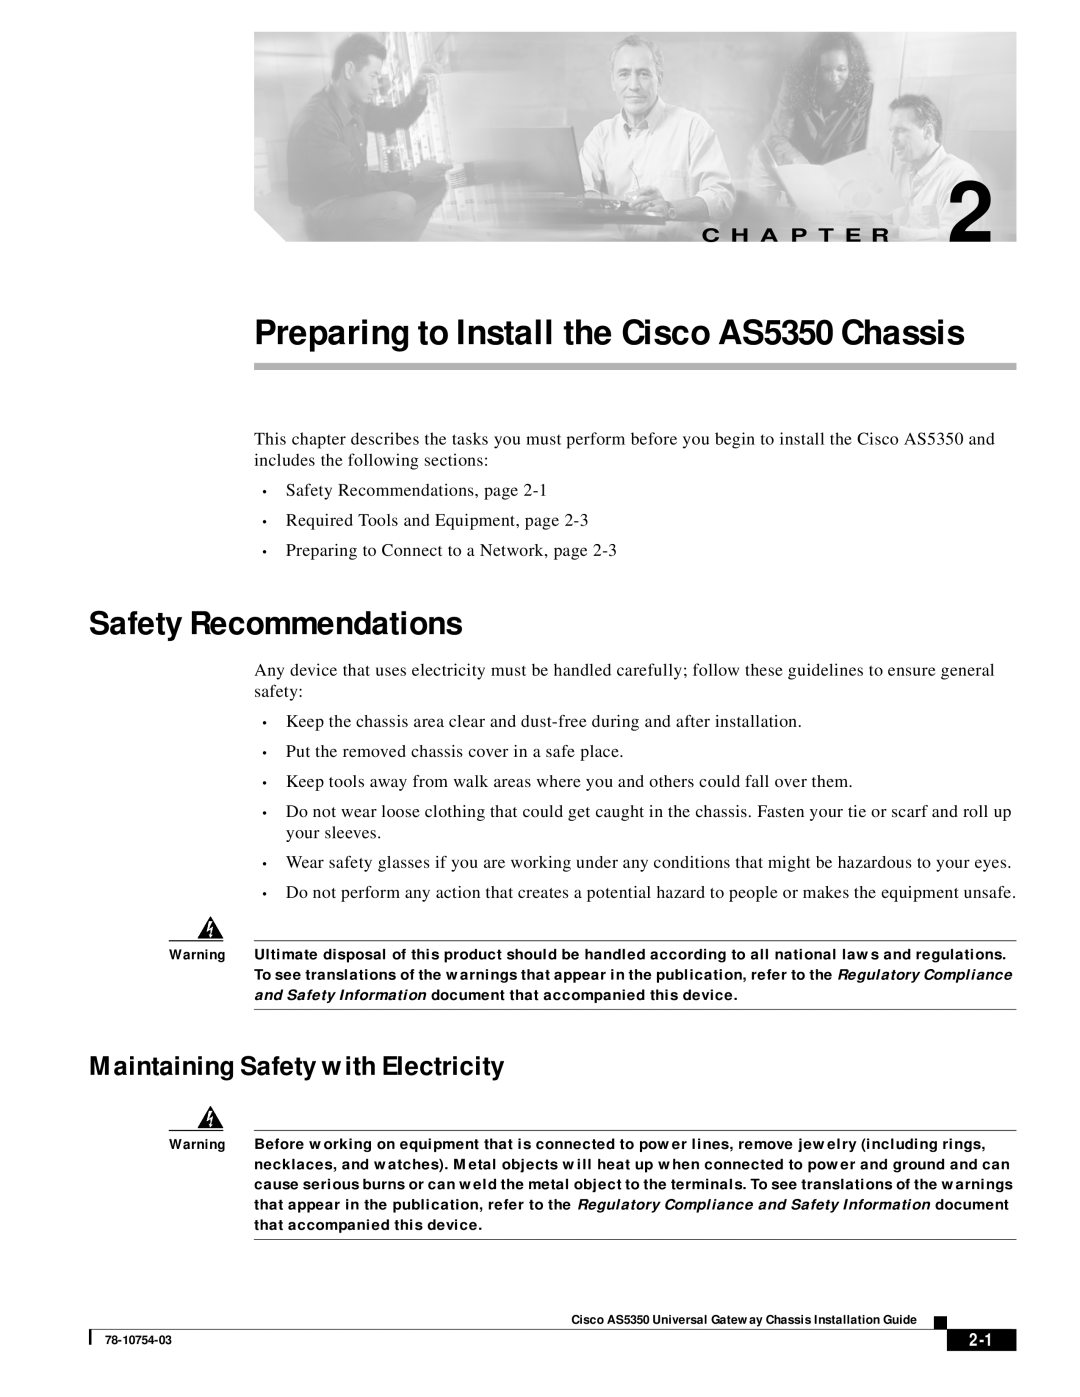 Cisco Systems manual Corporate Headquarters, Cisco AS5350 and Cisco AS5400 Universal Gateway Card, Installation Guide 